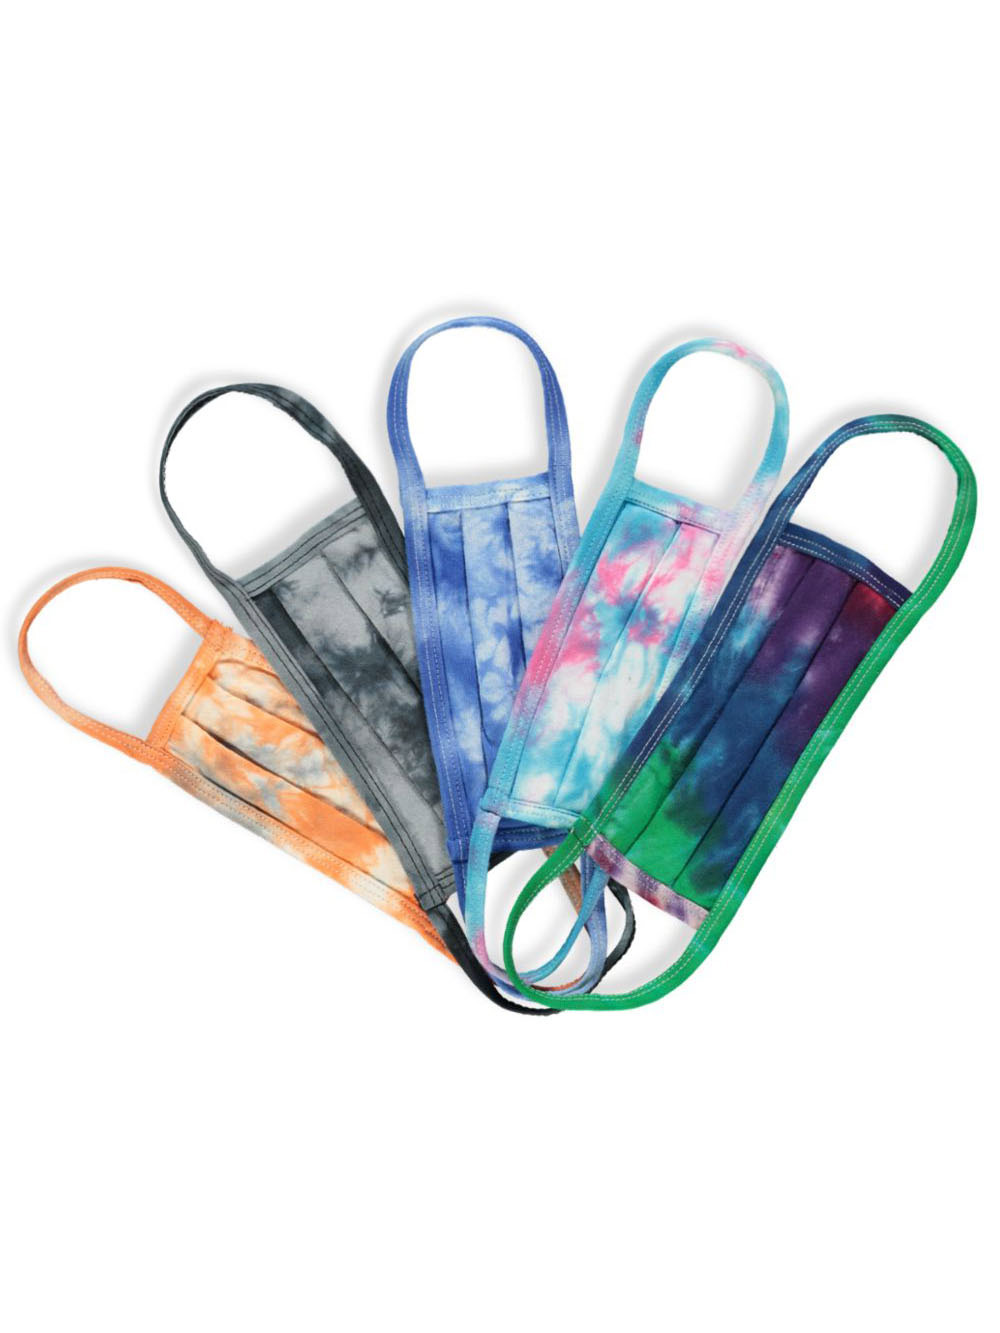 5-Pack Real Tie-Dye 100% Cotton 2 Layer Reusable Face Mask - one color, one size - image 2 of 2